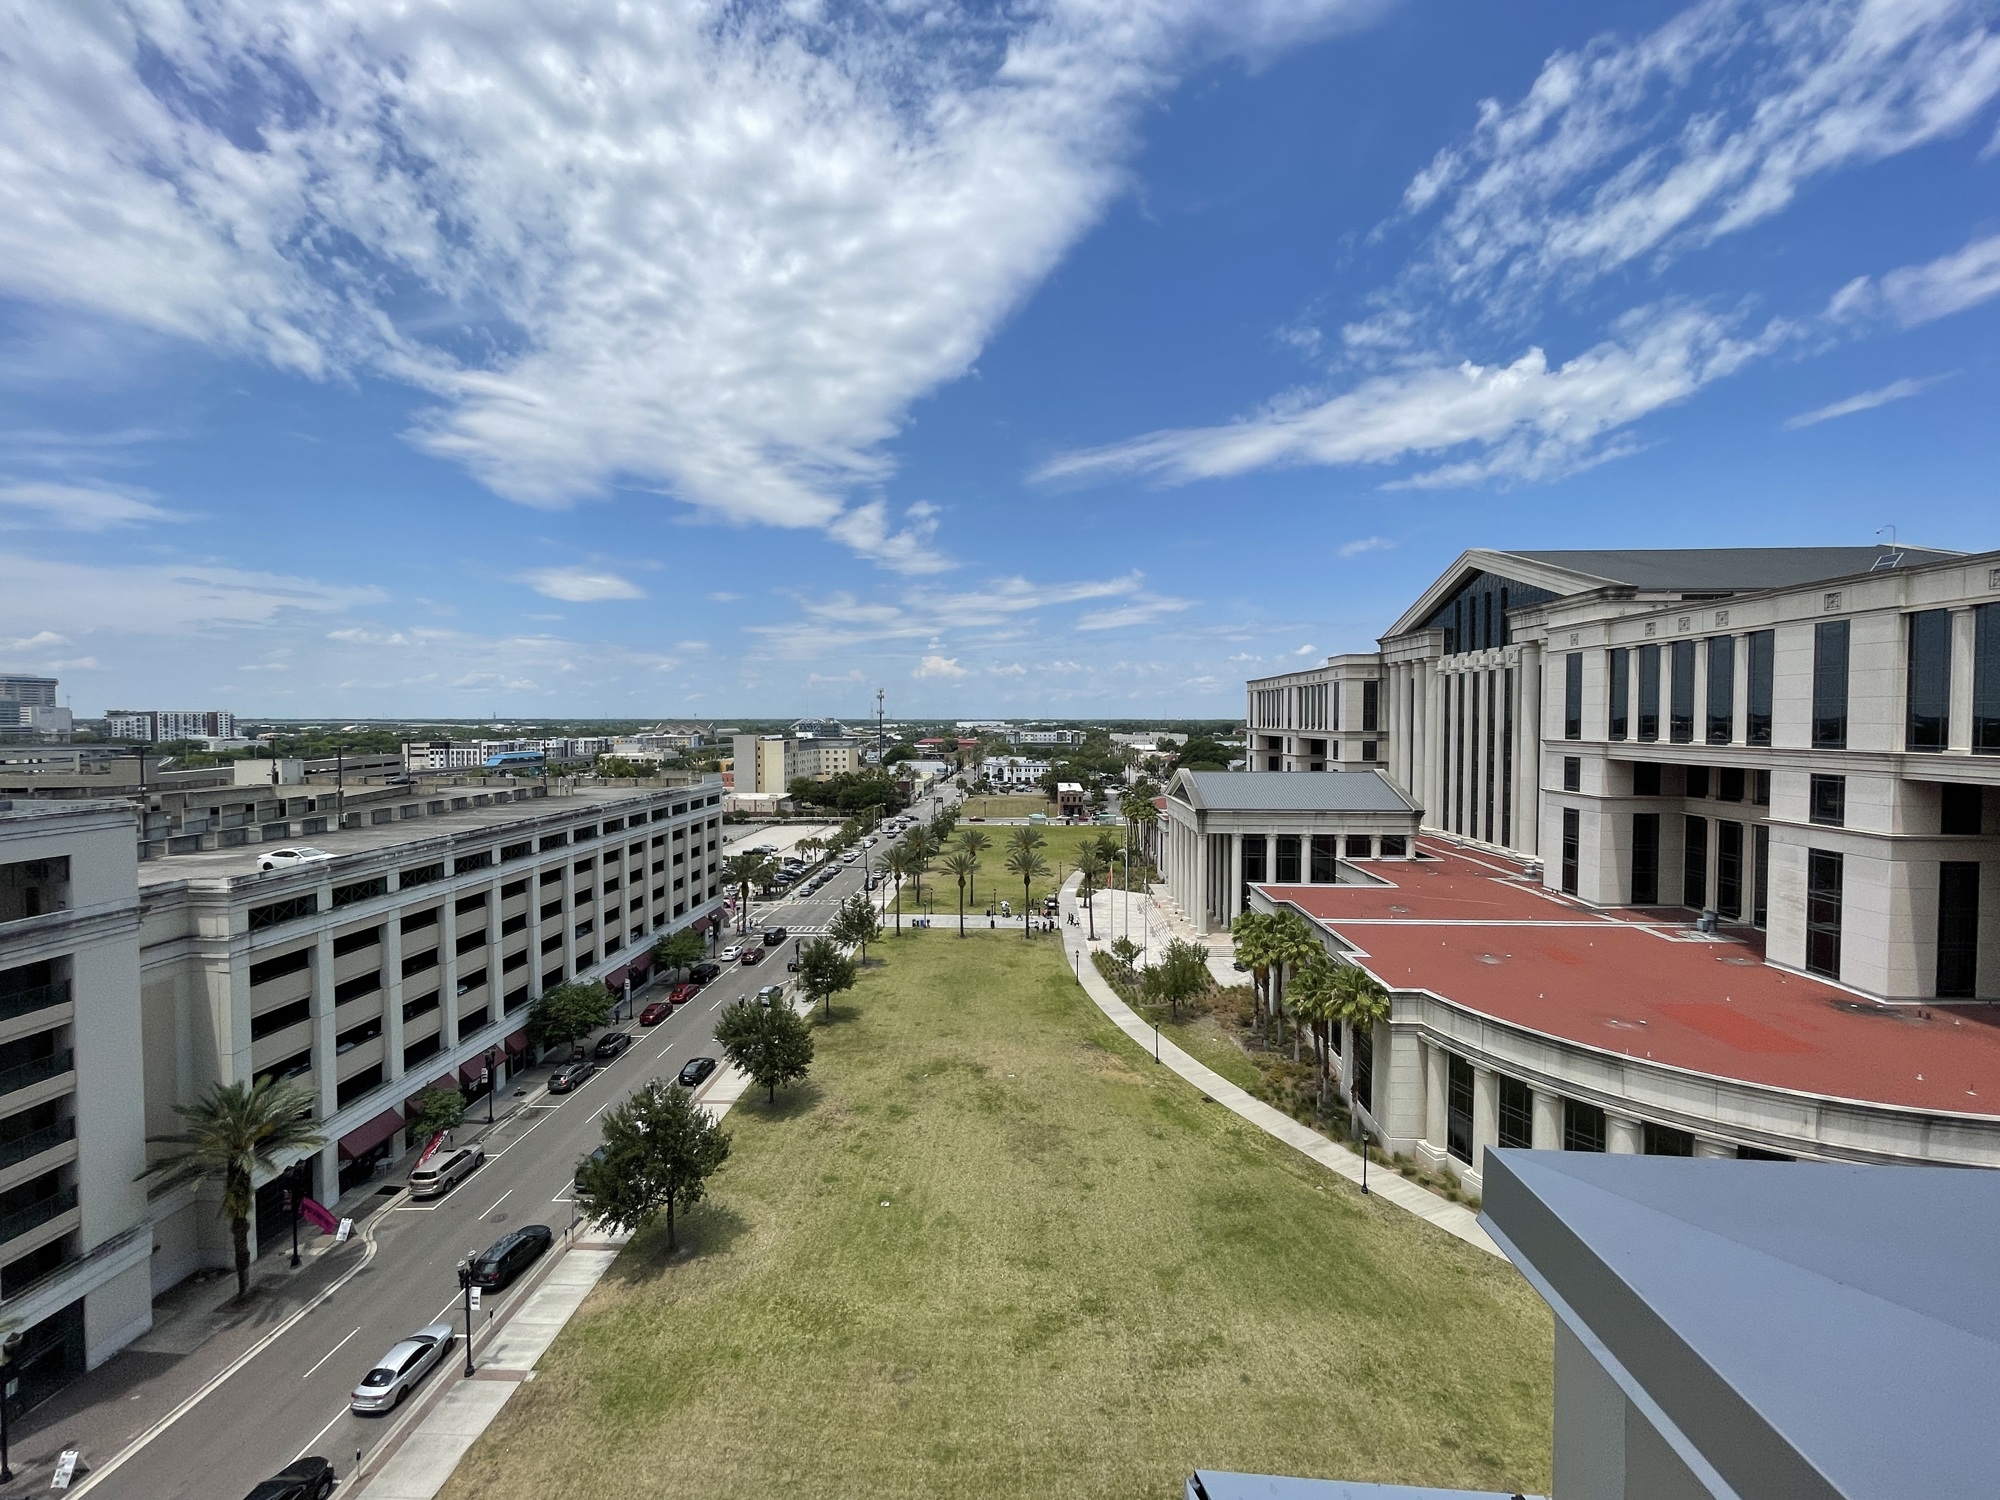 The view from the new JEA headquarters. At right is  the Duval County Courthouse.